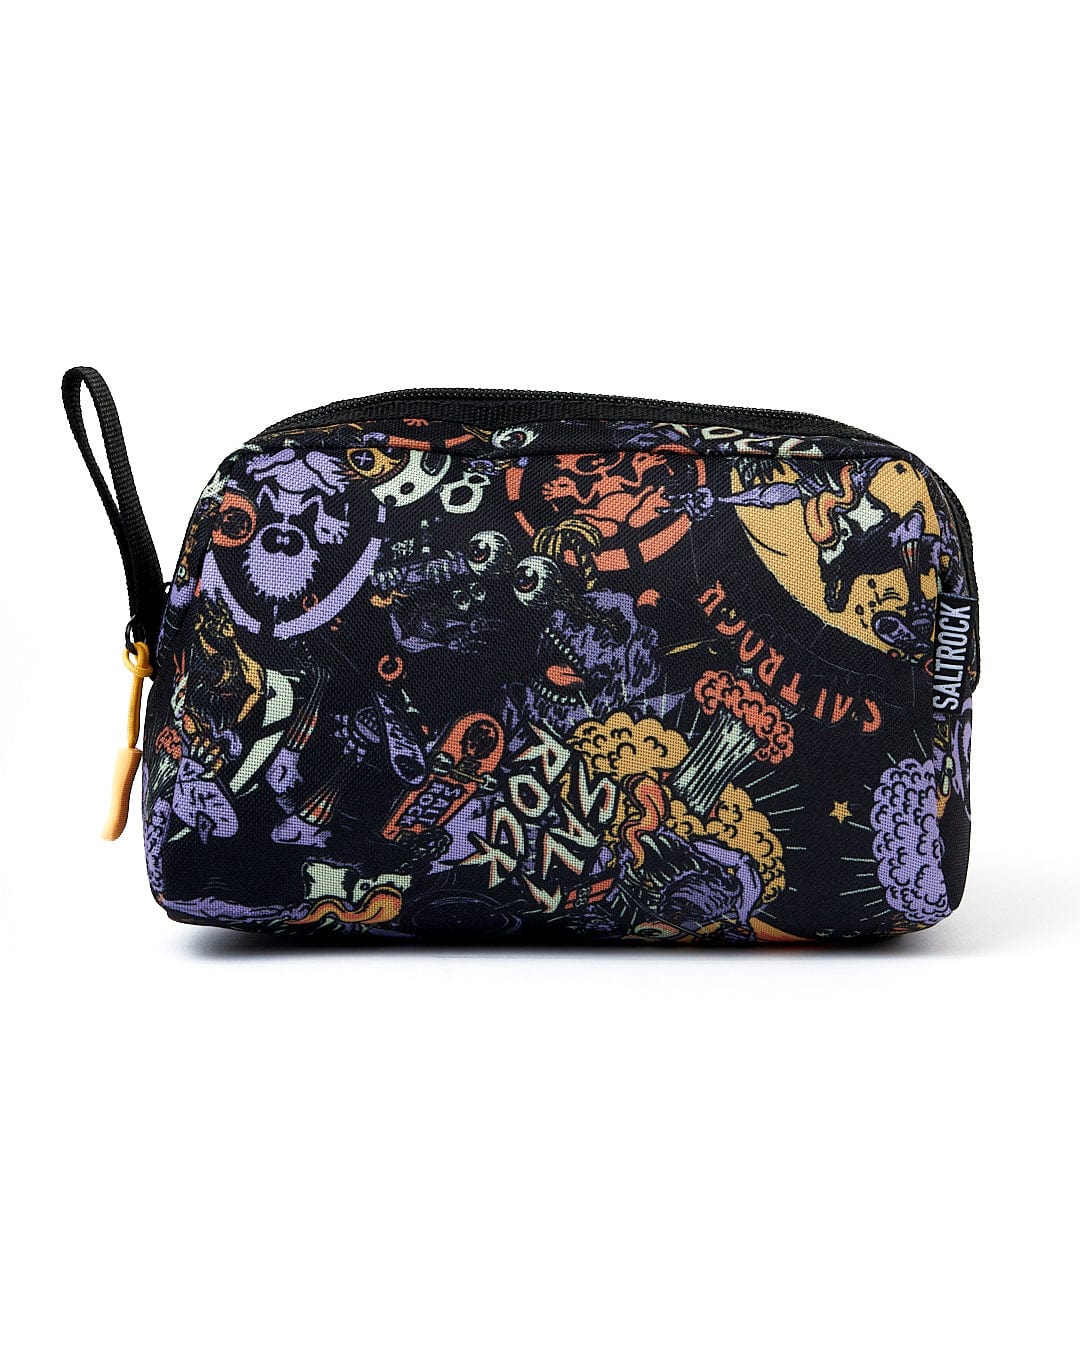 A Creeper Crew - Pencil Case - Black zippered pouch with a colorful design on it by Saltrock.